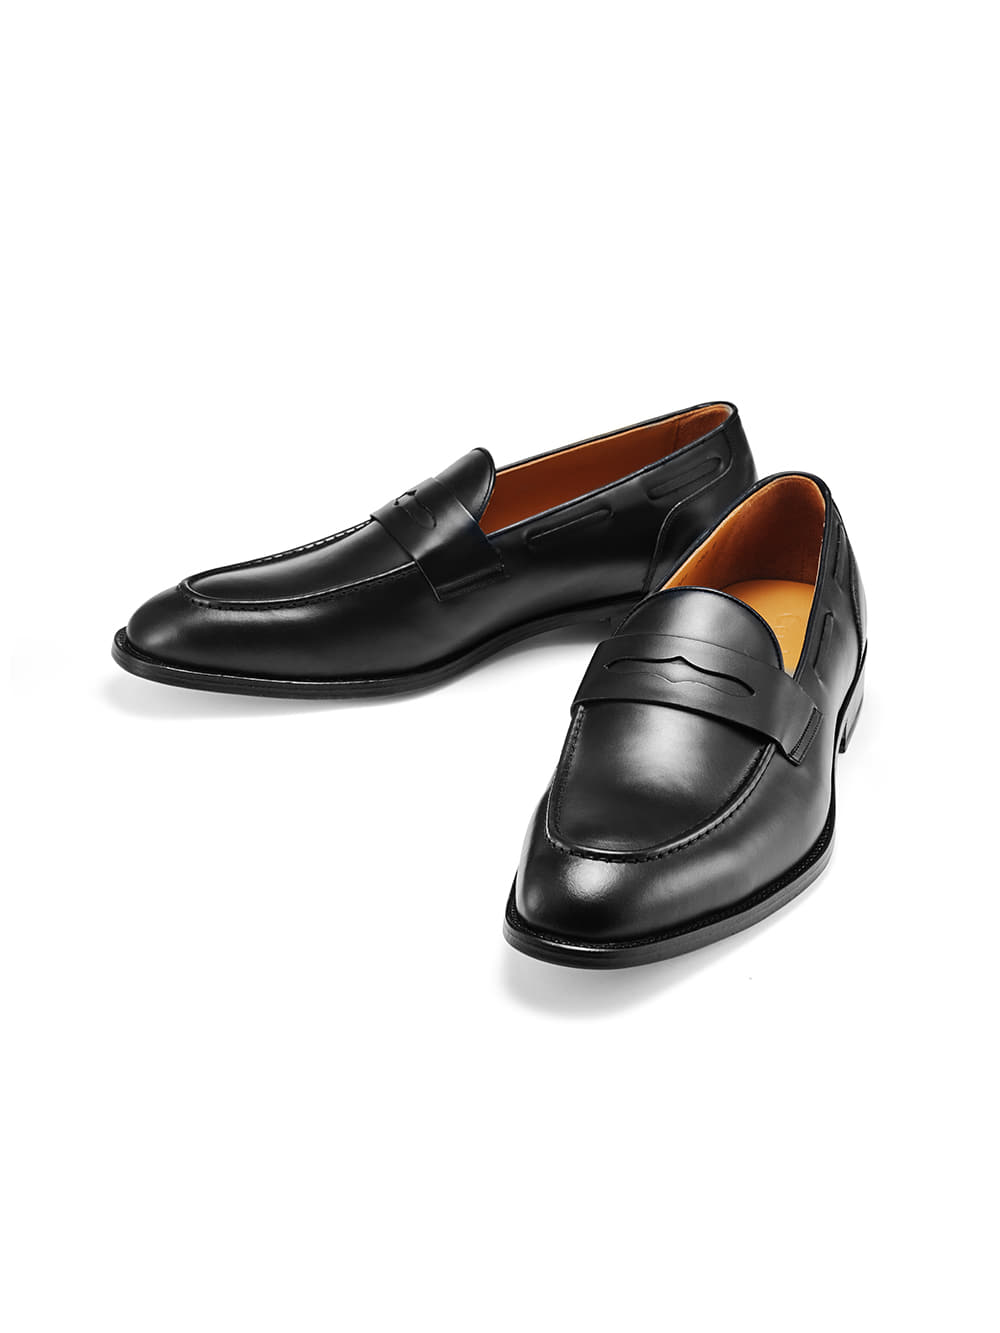 Penny Slot Leather Loafers (Black)